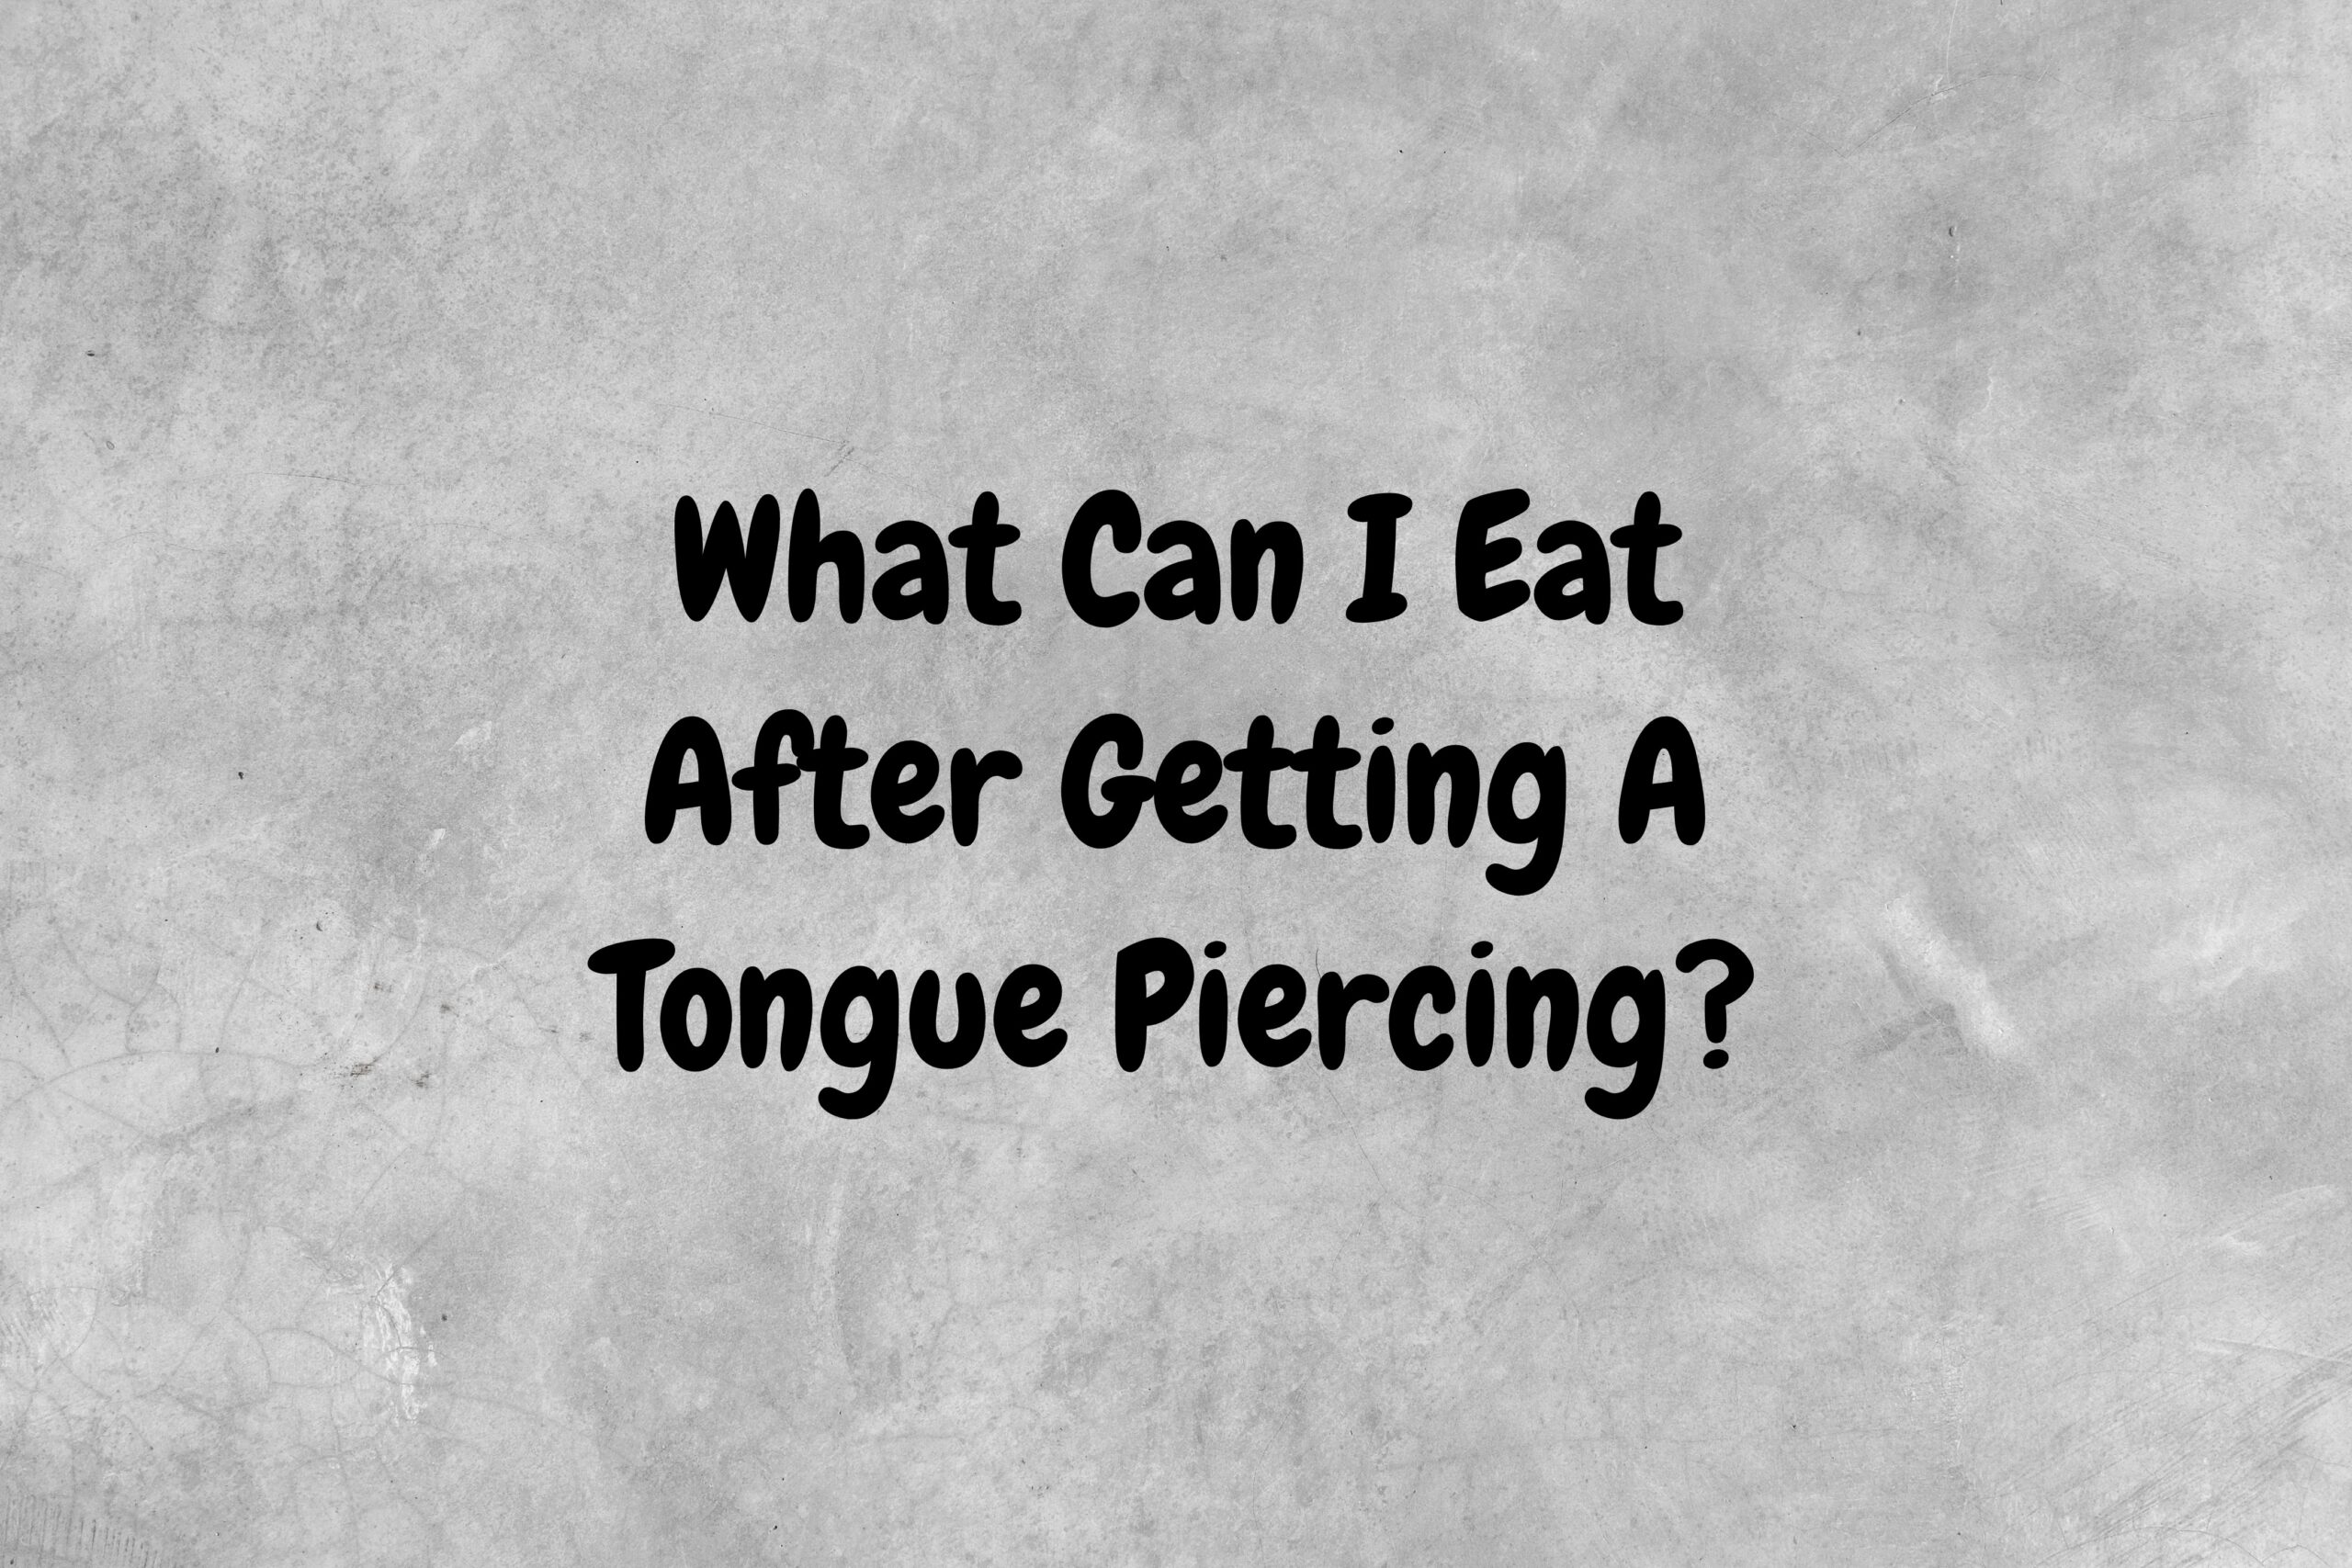 An image with a gray background and black lettering asking the question, "What can I eat after getting a tongue piercing?"